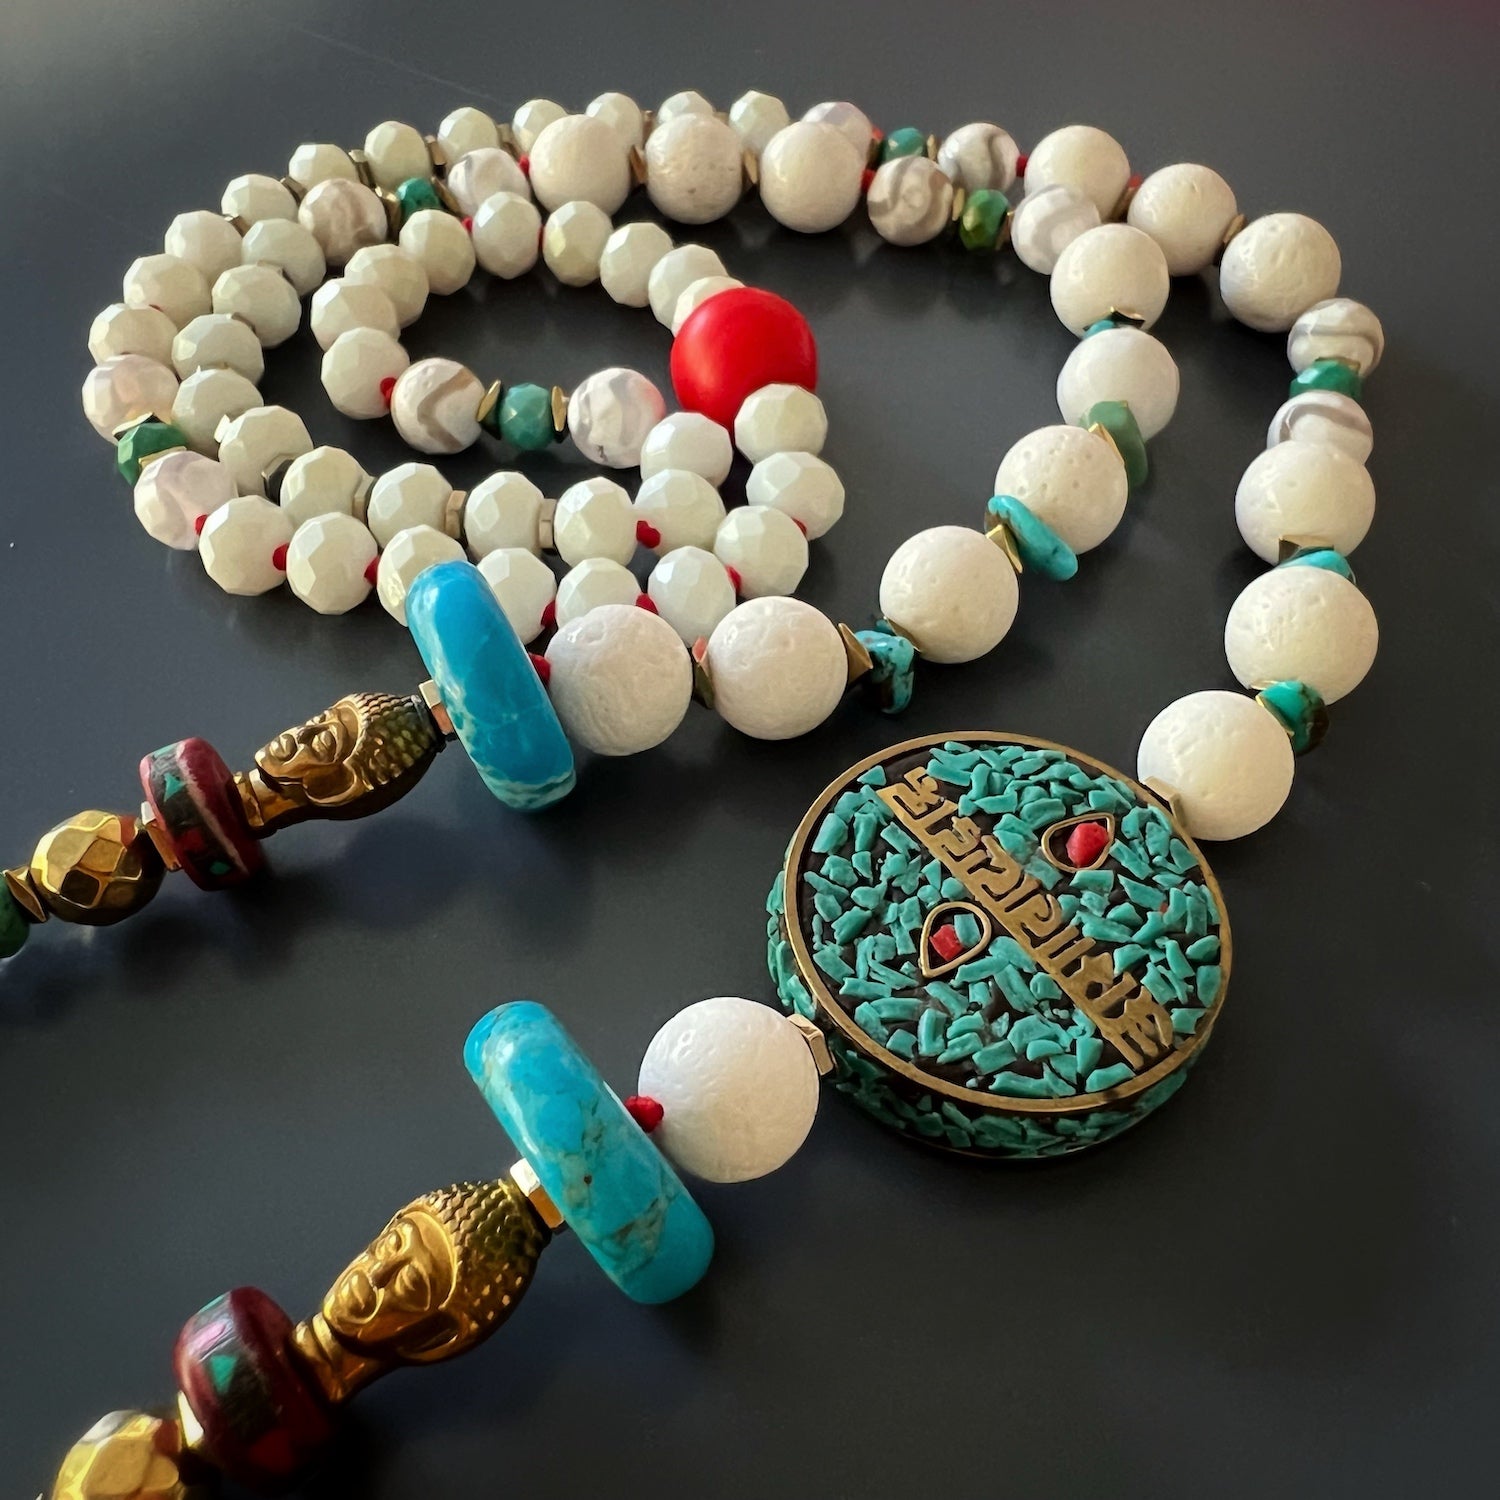 Enchanting Beauty: Gold-colored hematite and Nepal meditation beads on the Mantra Necklace.